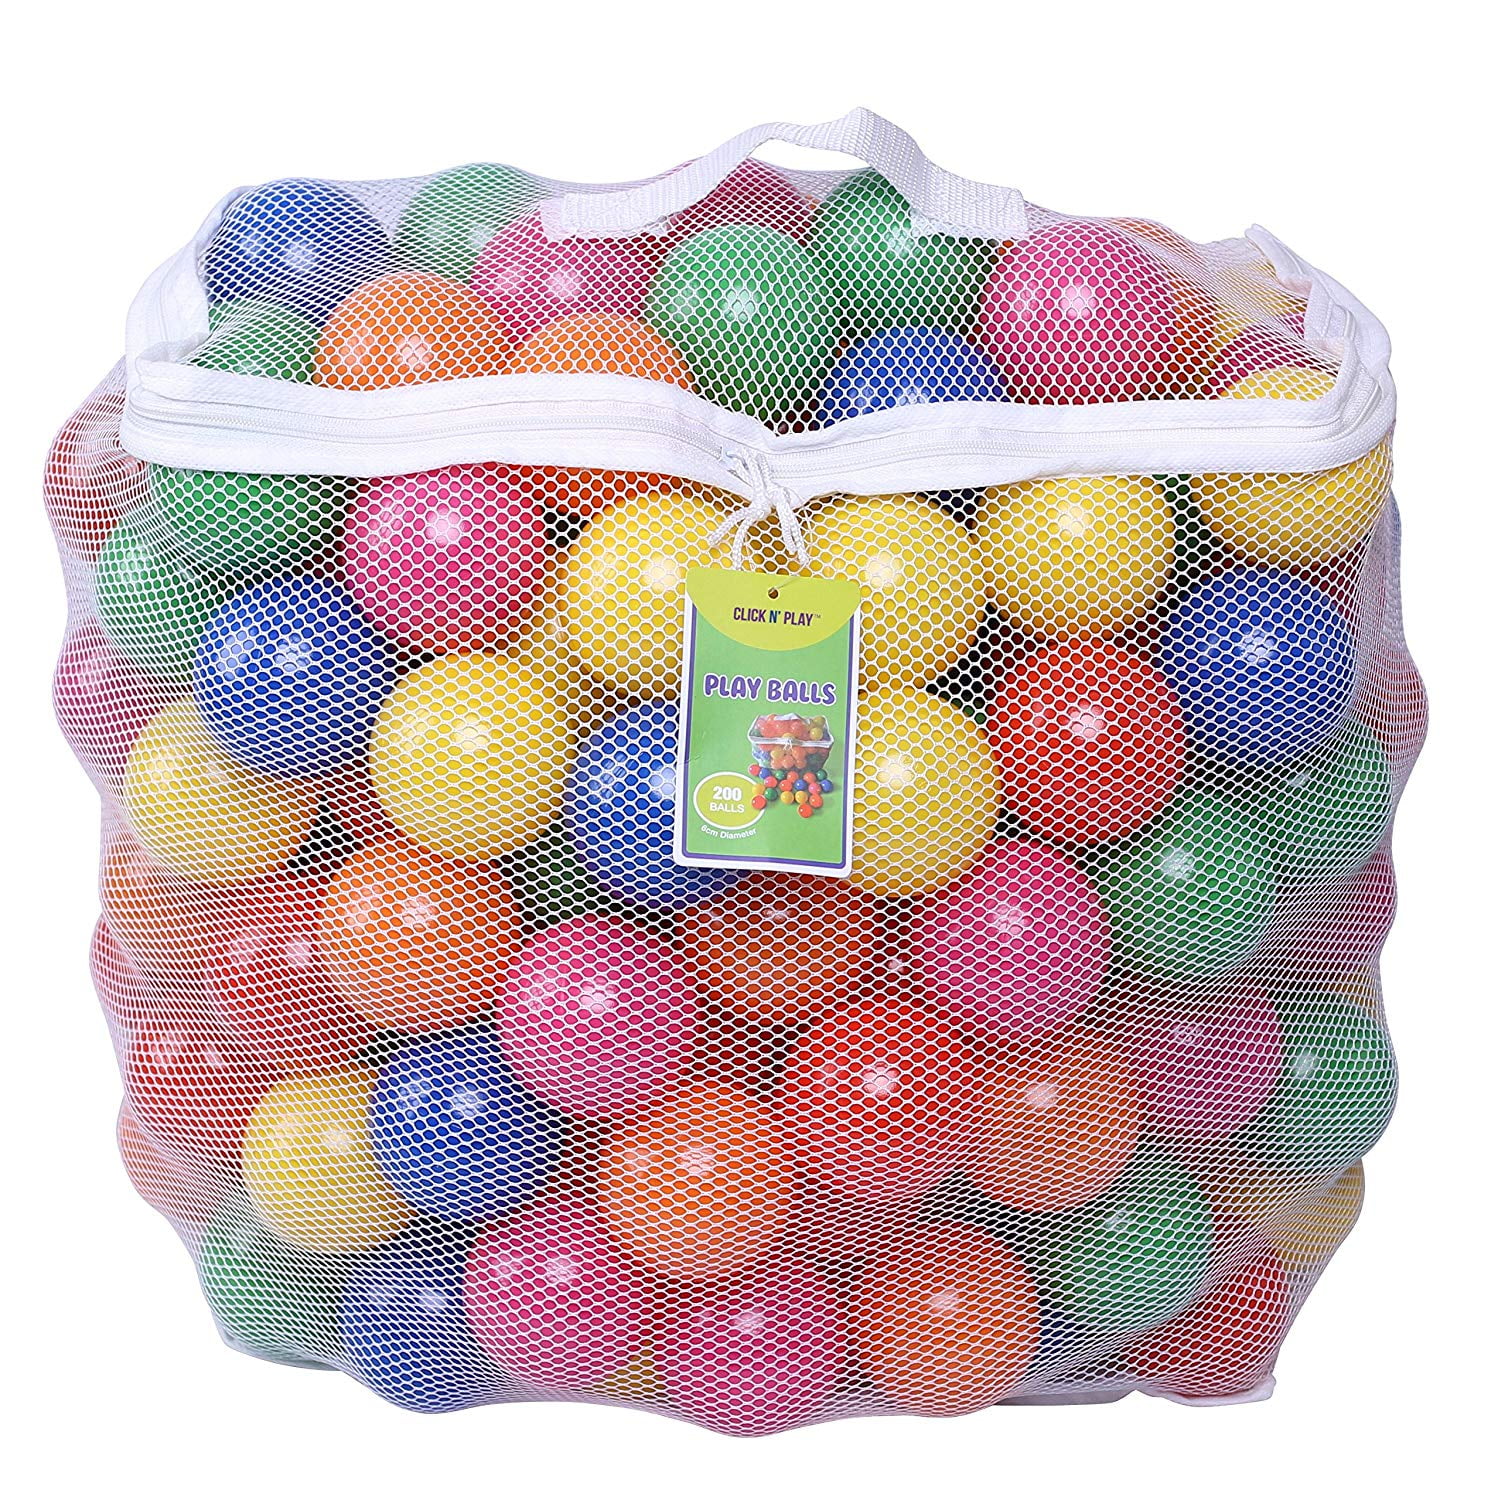 ItsYouForrever Pit Balls Crush Proof Plastic Childrens Toy Balls Multiple Colour Sea Balls Pack of 100 Green